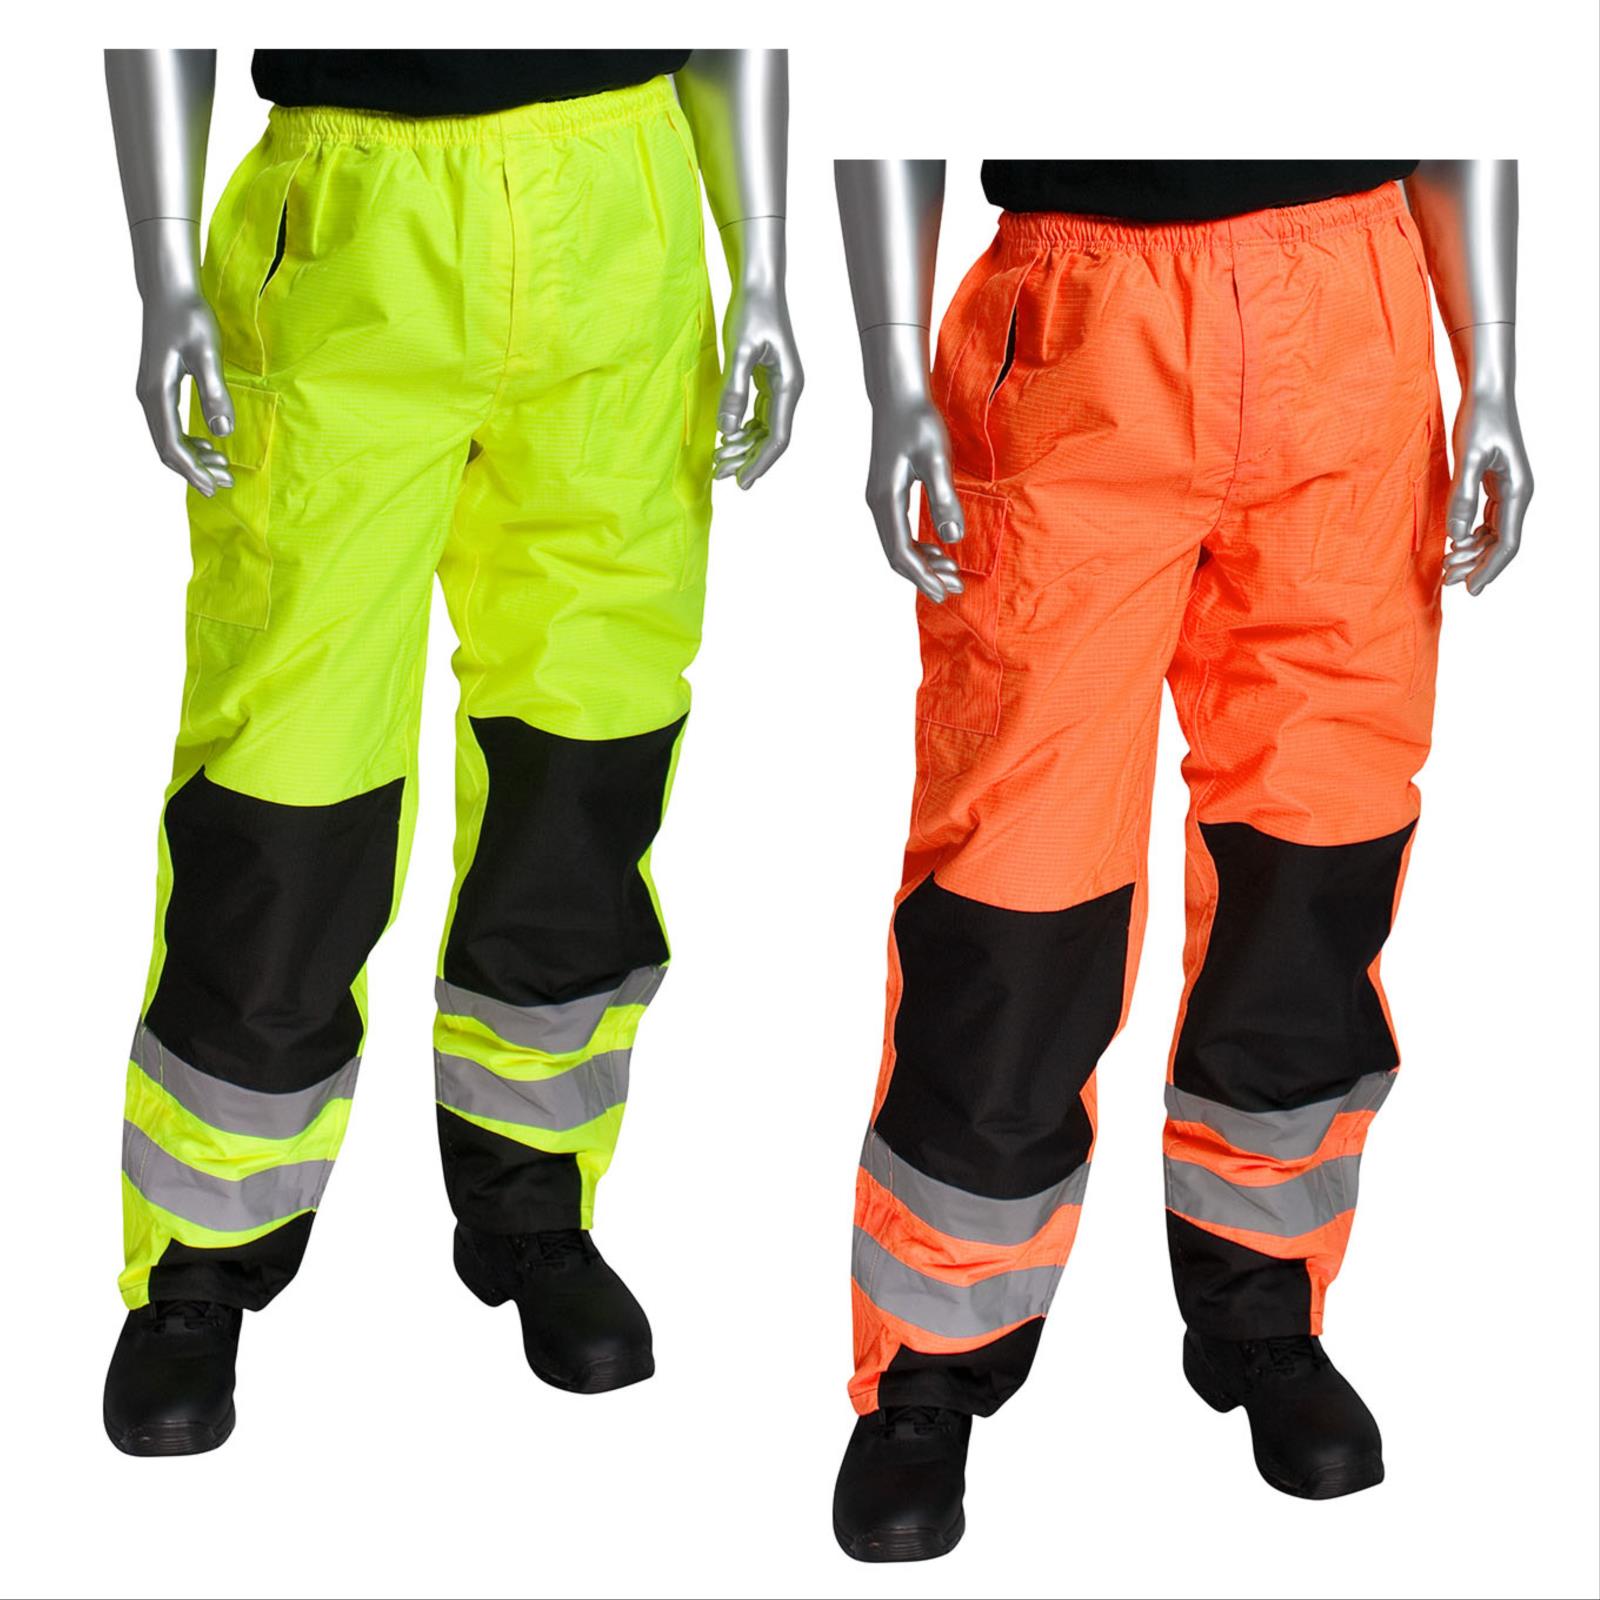 Ripstop Reinforced Overpant, Class E